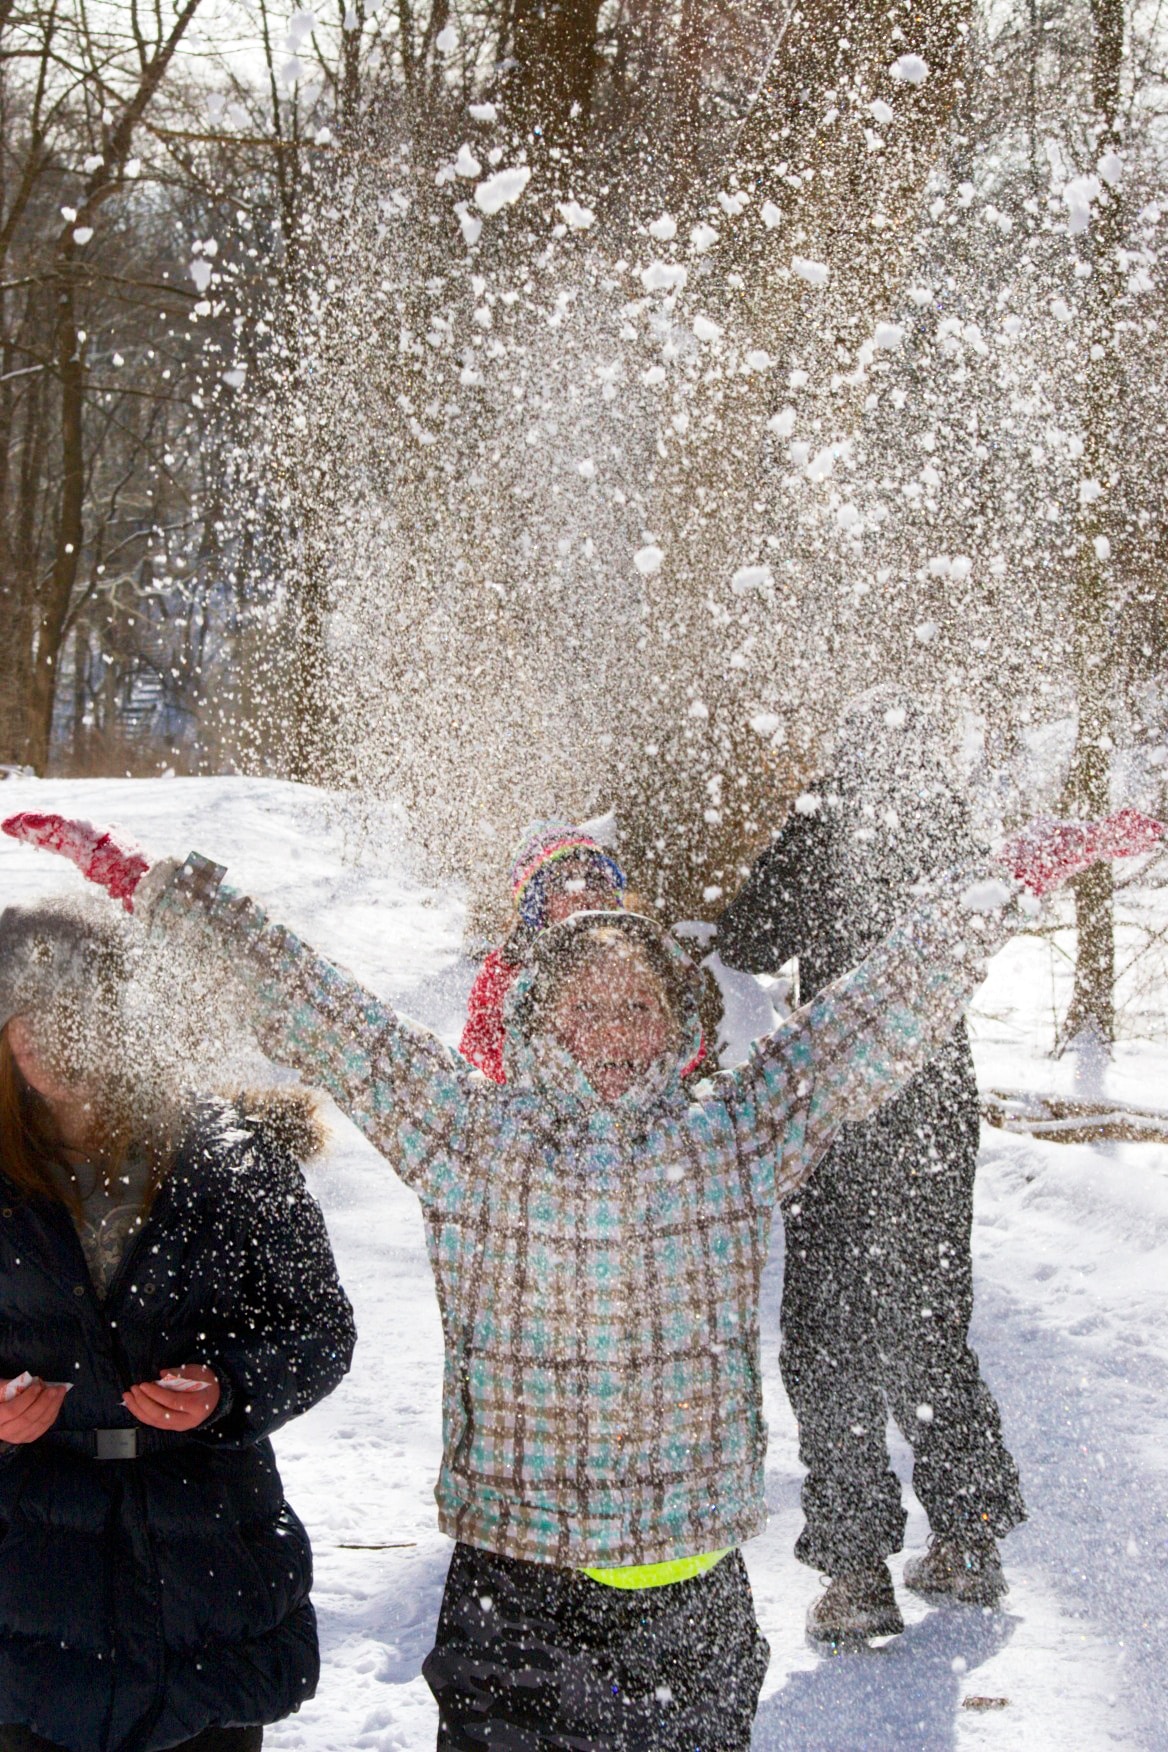 Child throwing snow into the air